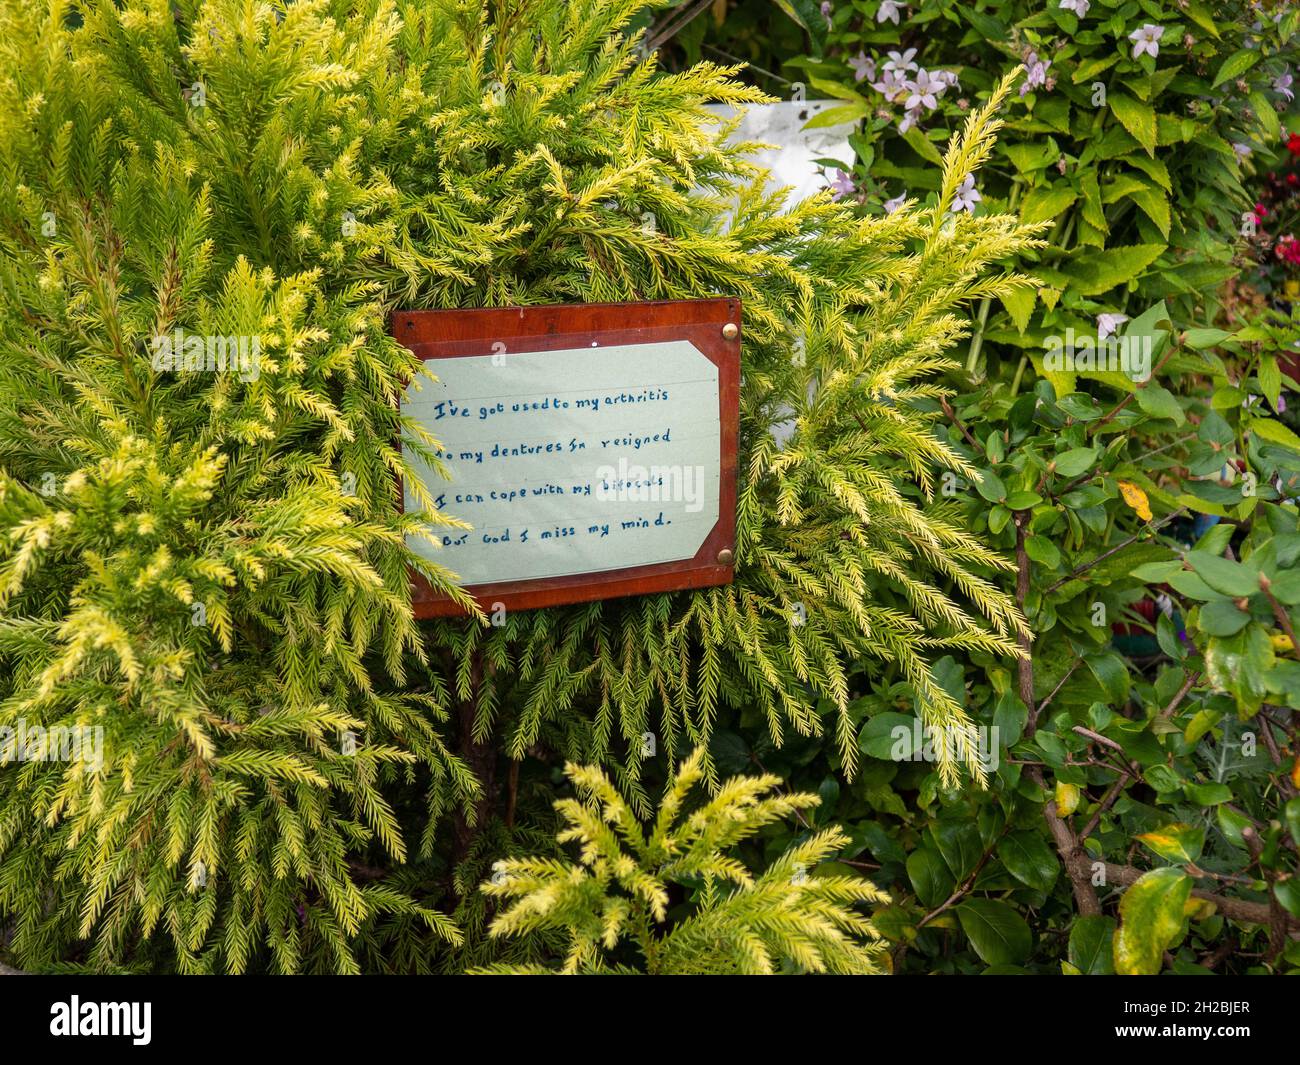 Humorous hand-written sign about the perils of growing old, in a garden in the village of Eyam, Derbyshire, UK Stock Photo